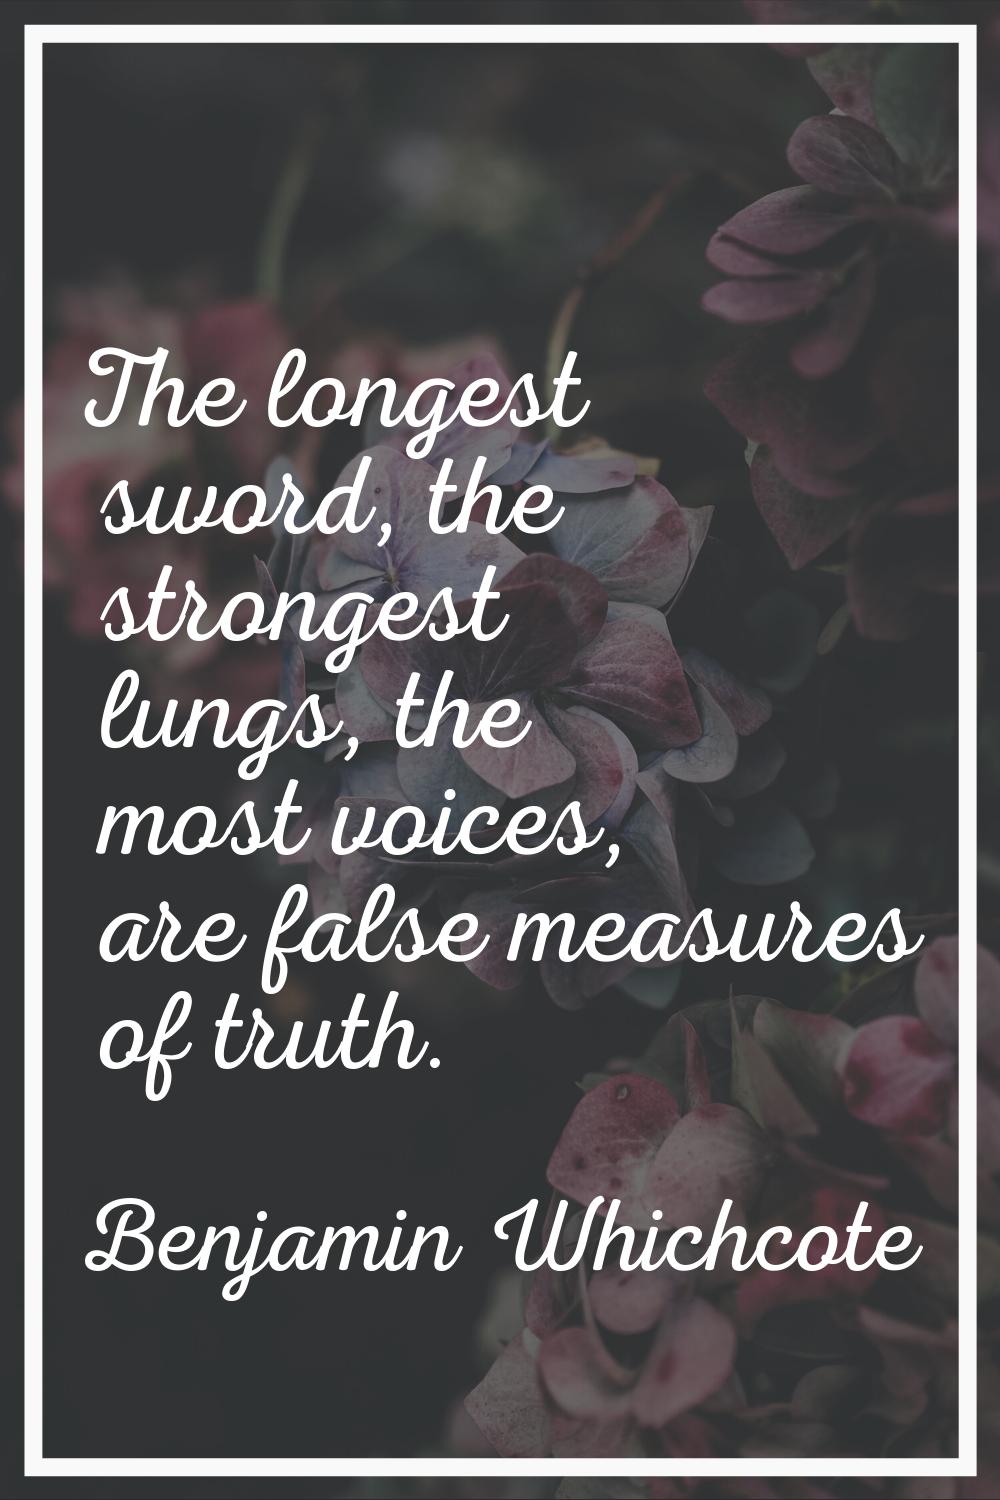 The longest sword, the strongest lungs, the most voices, are false measures of truth.